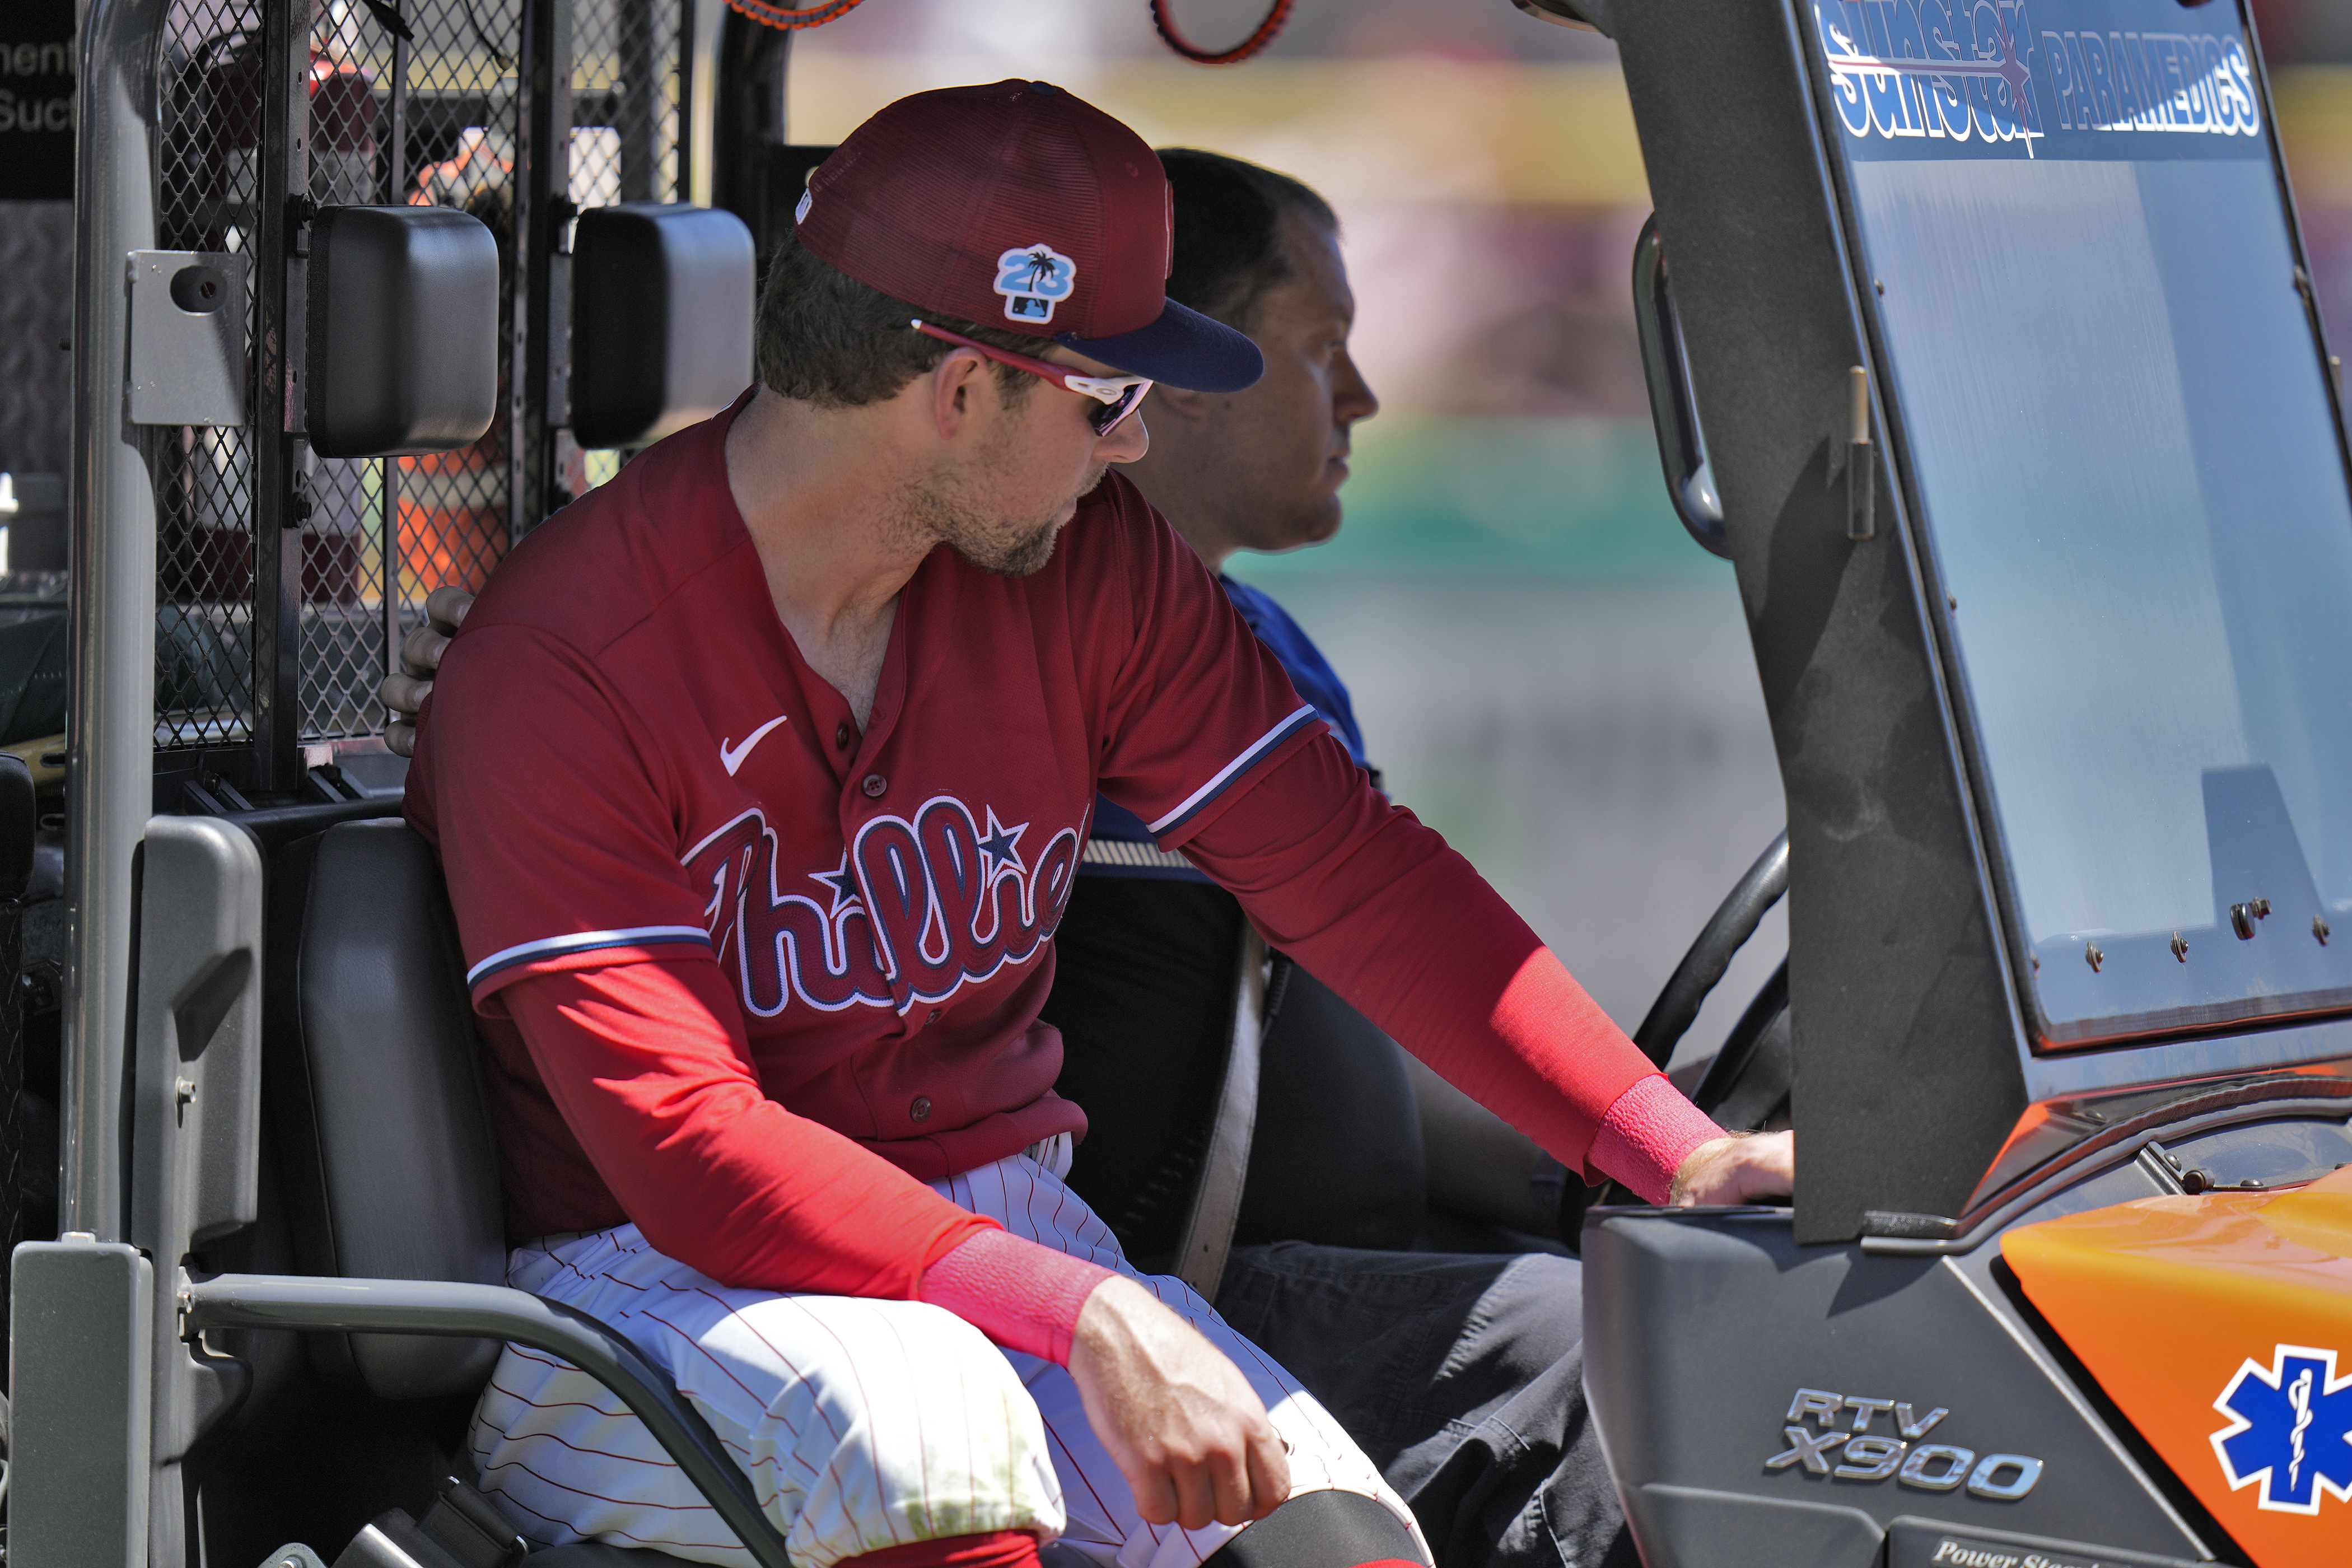 Phillis' Rhys Hoskins (knee) to undergo ACL reconstruction surgery